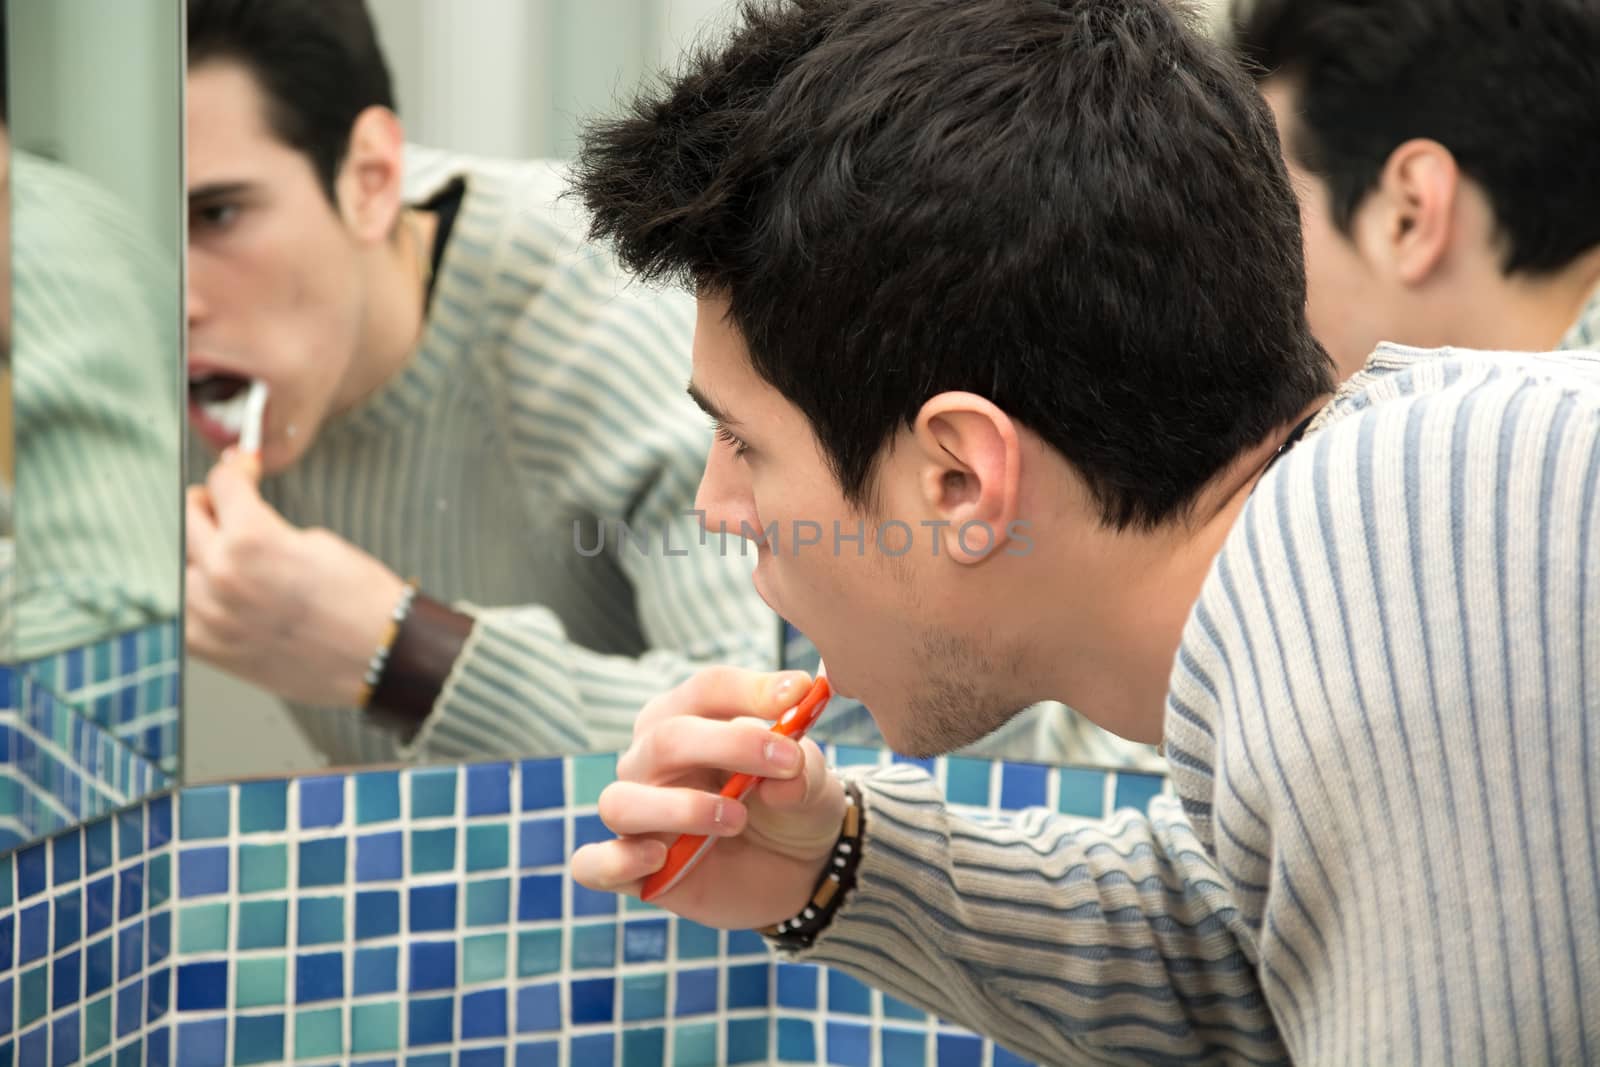 Headshot of attractive young man brushing teeth with toothbrush, looking at himself in mirror Headshot of attractive young man brushing teeth with toothbrush, looking at himself in mirror